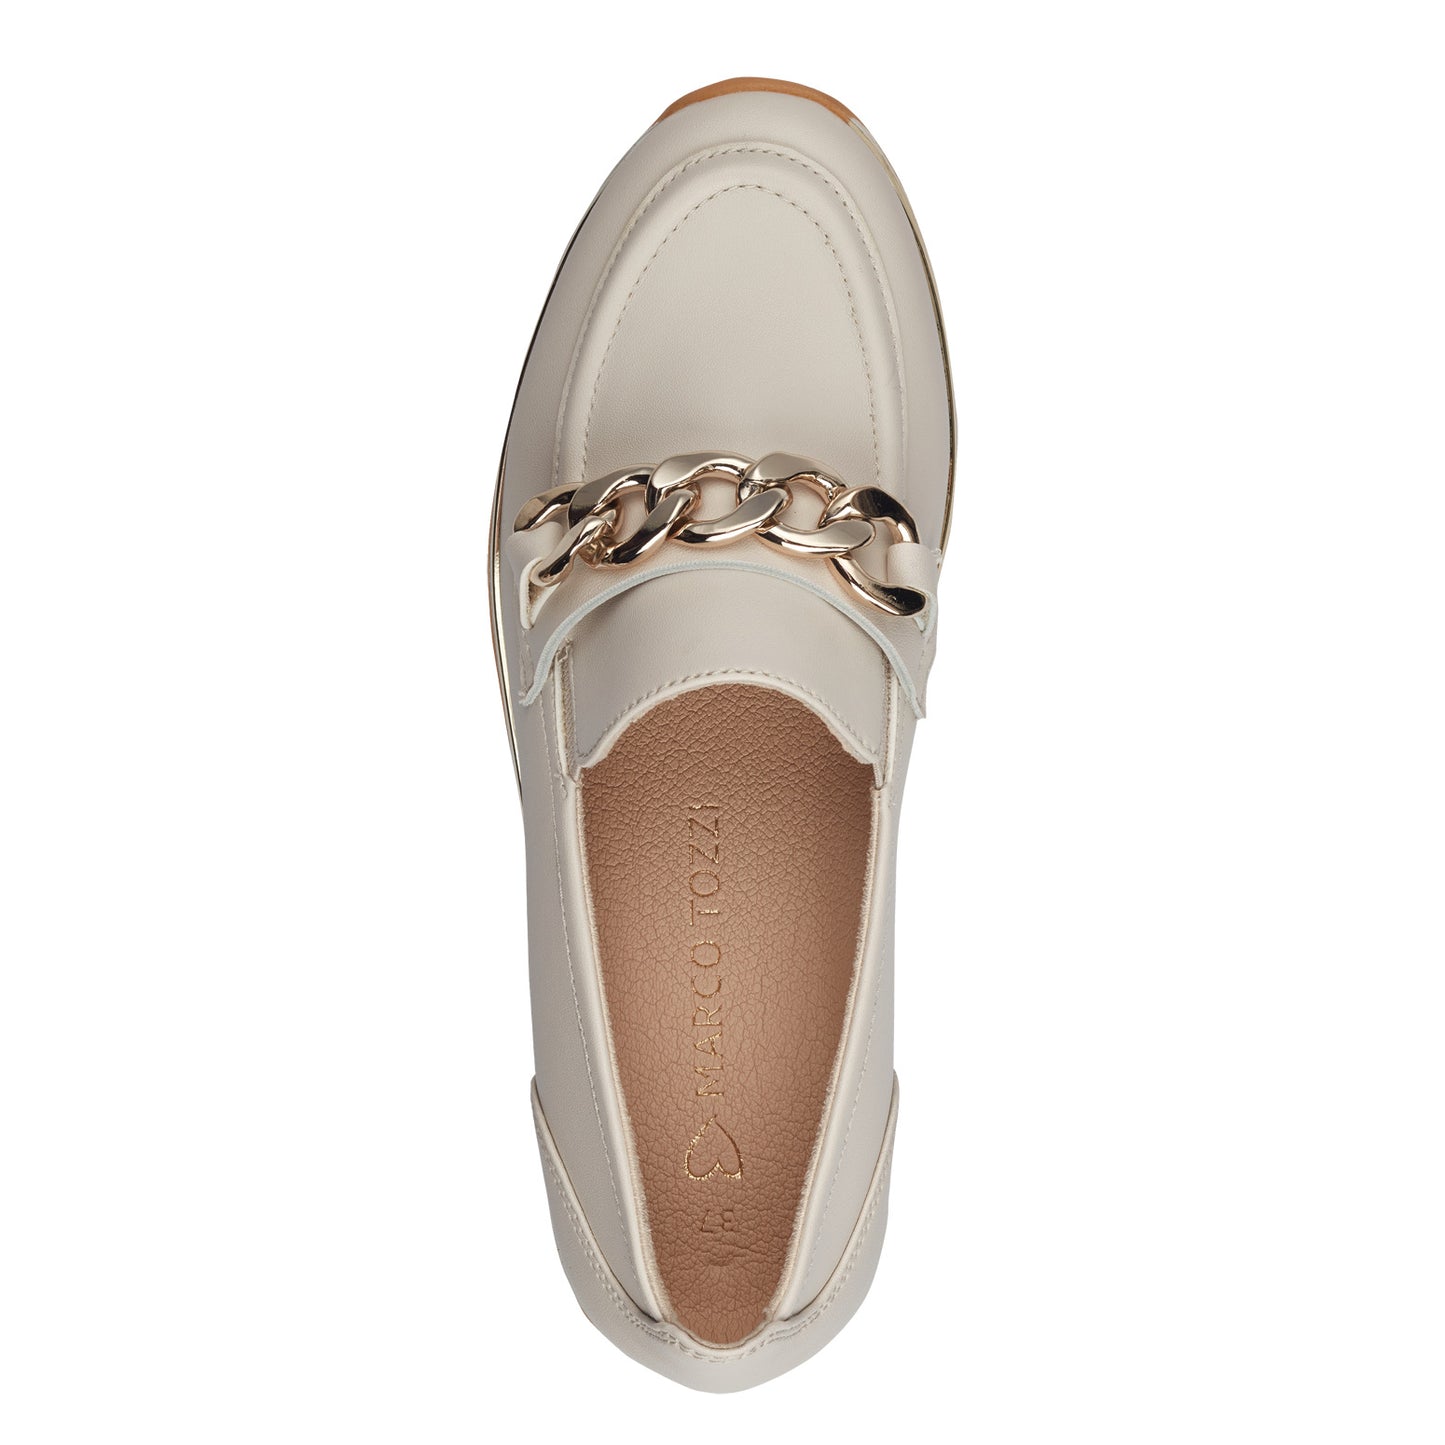 Marco Tozzi - Ladies Shoes Loafers Cream, Gold (2384)